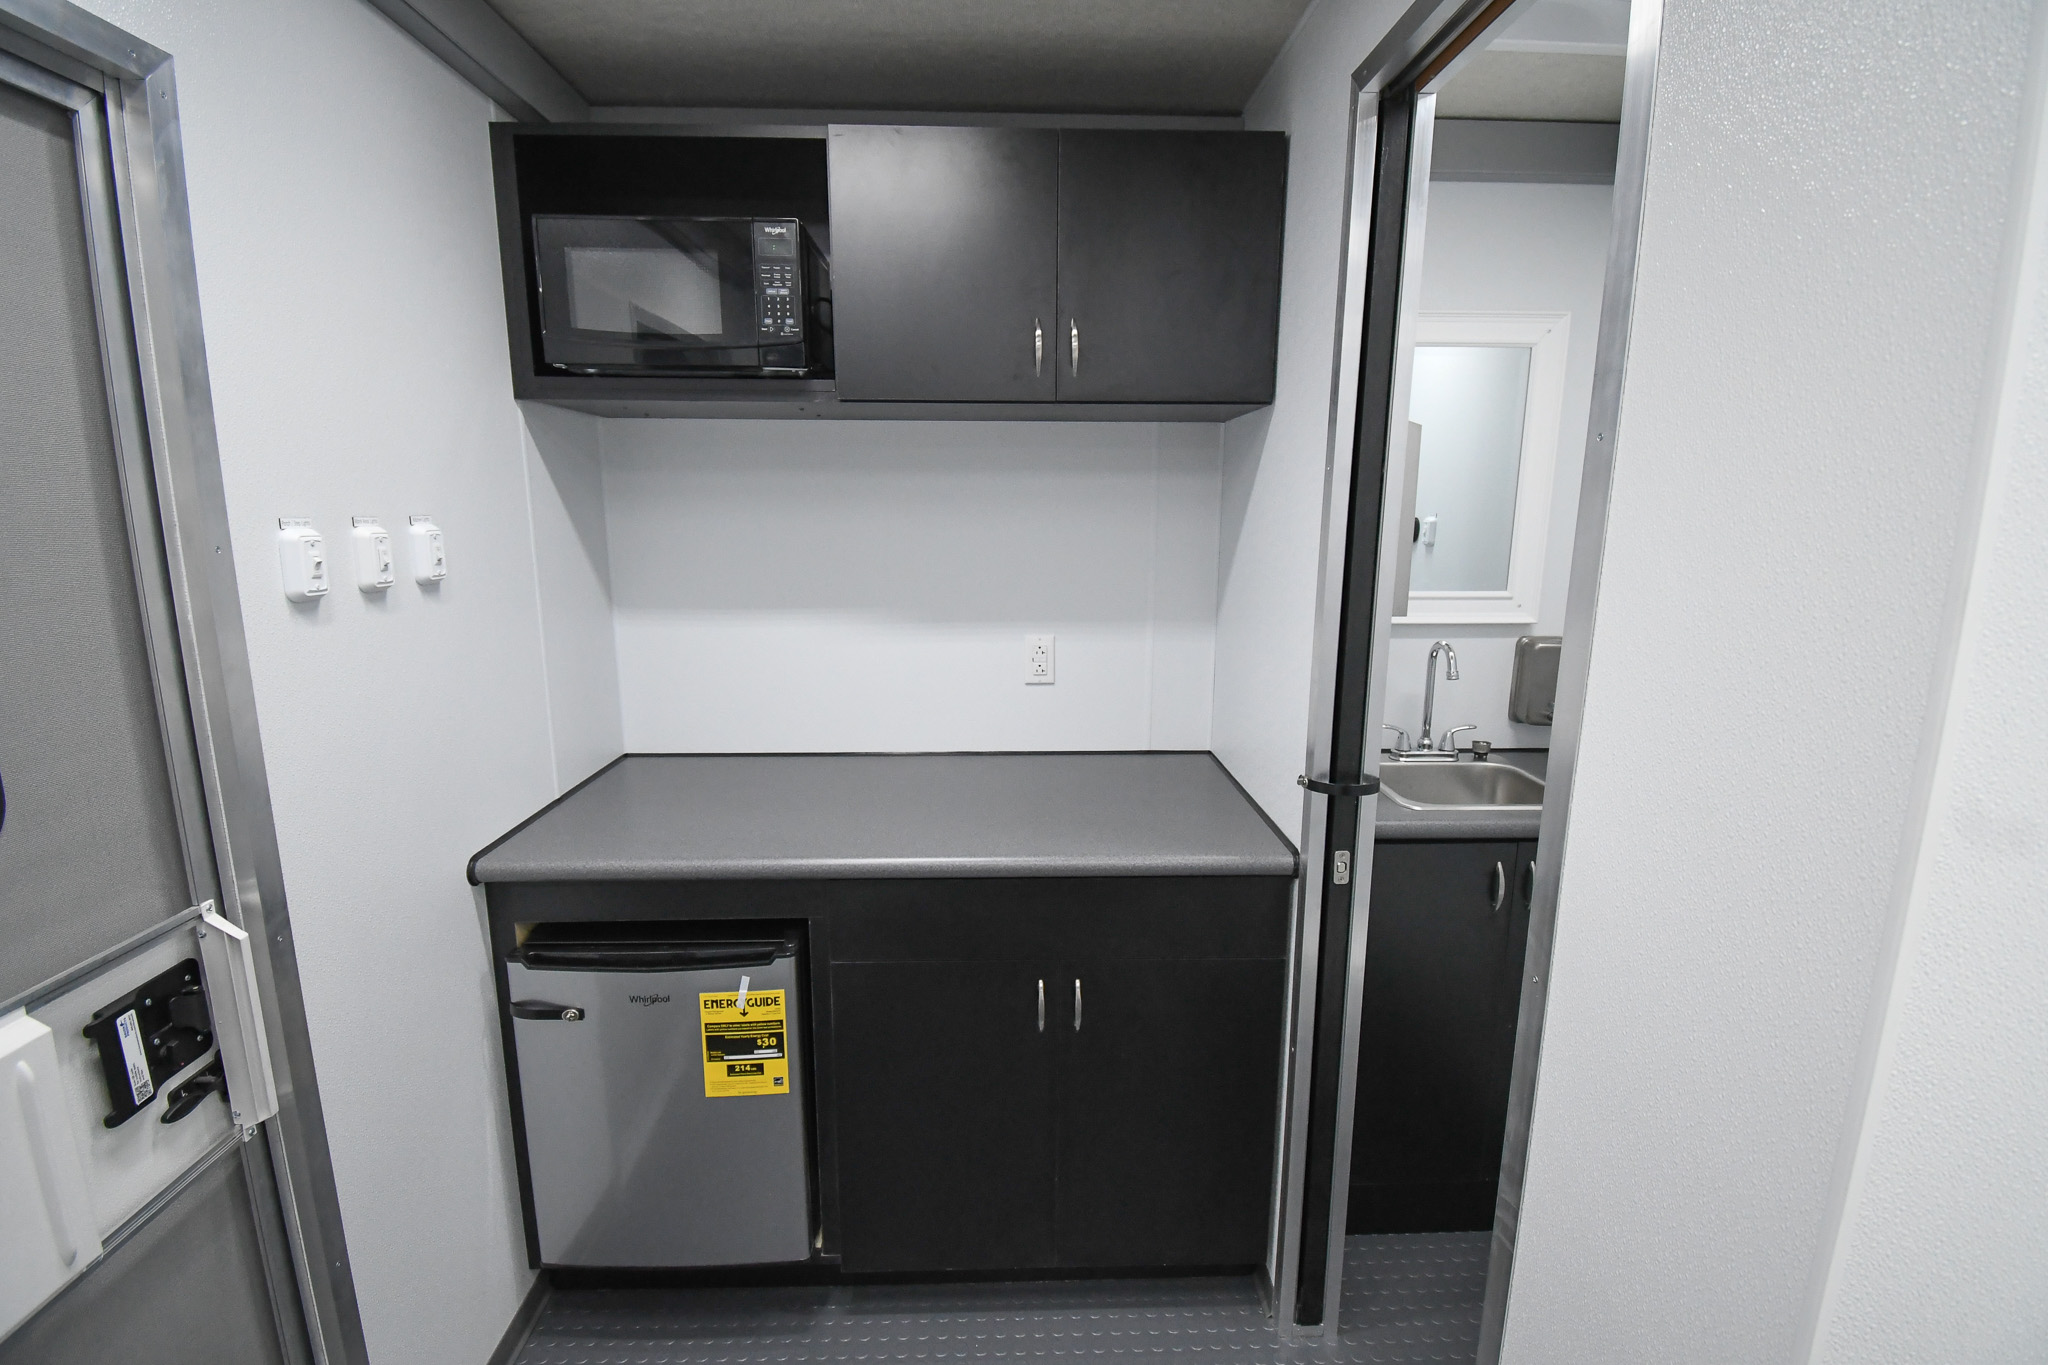 The kitchen and restroom inside the unit for Susquehanna County, PA.